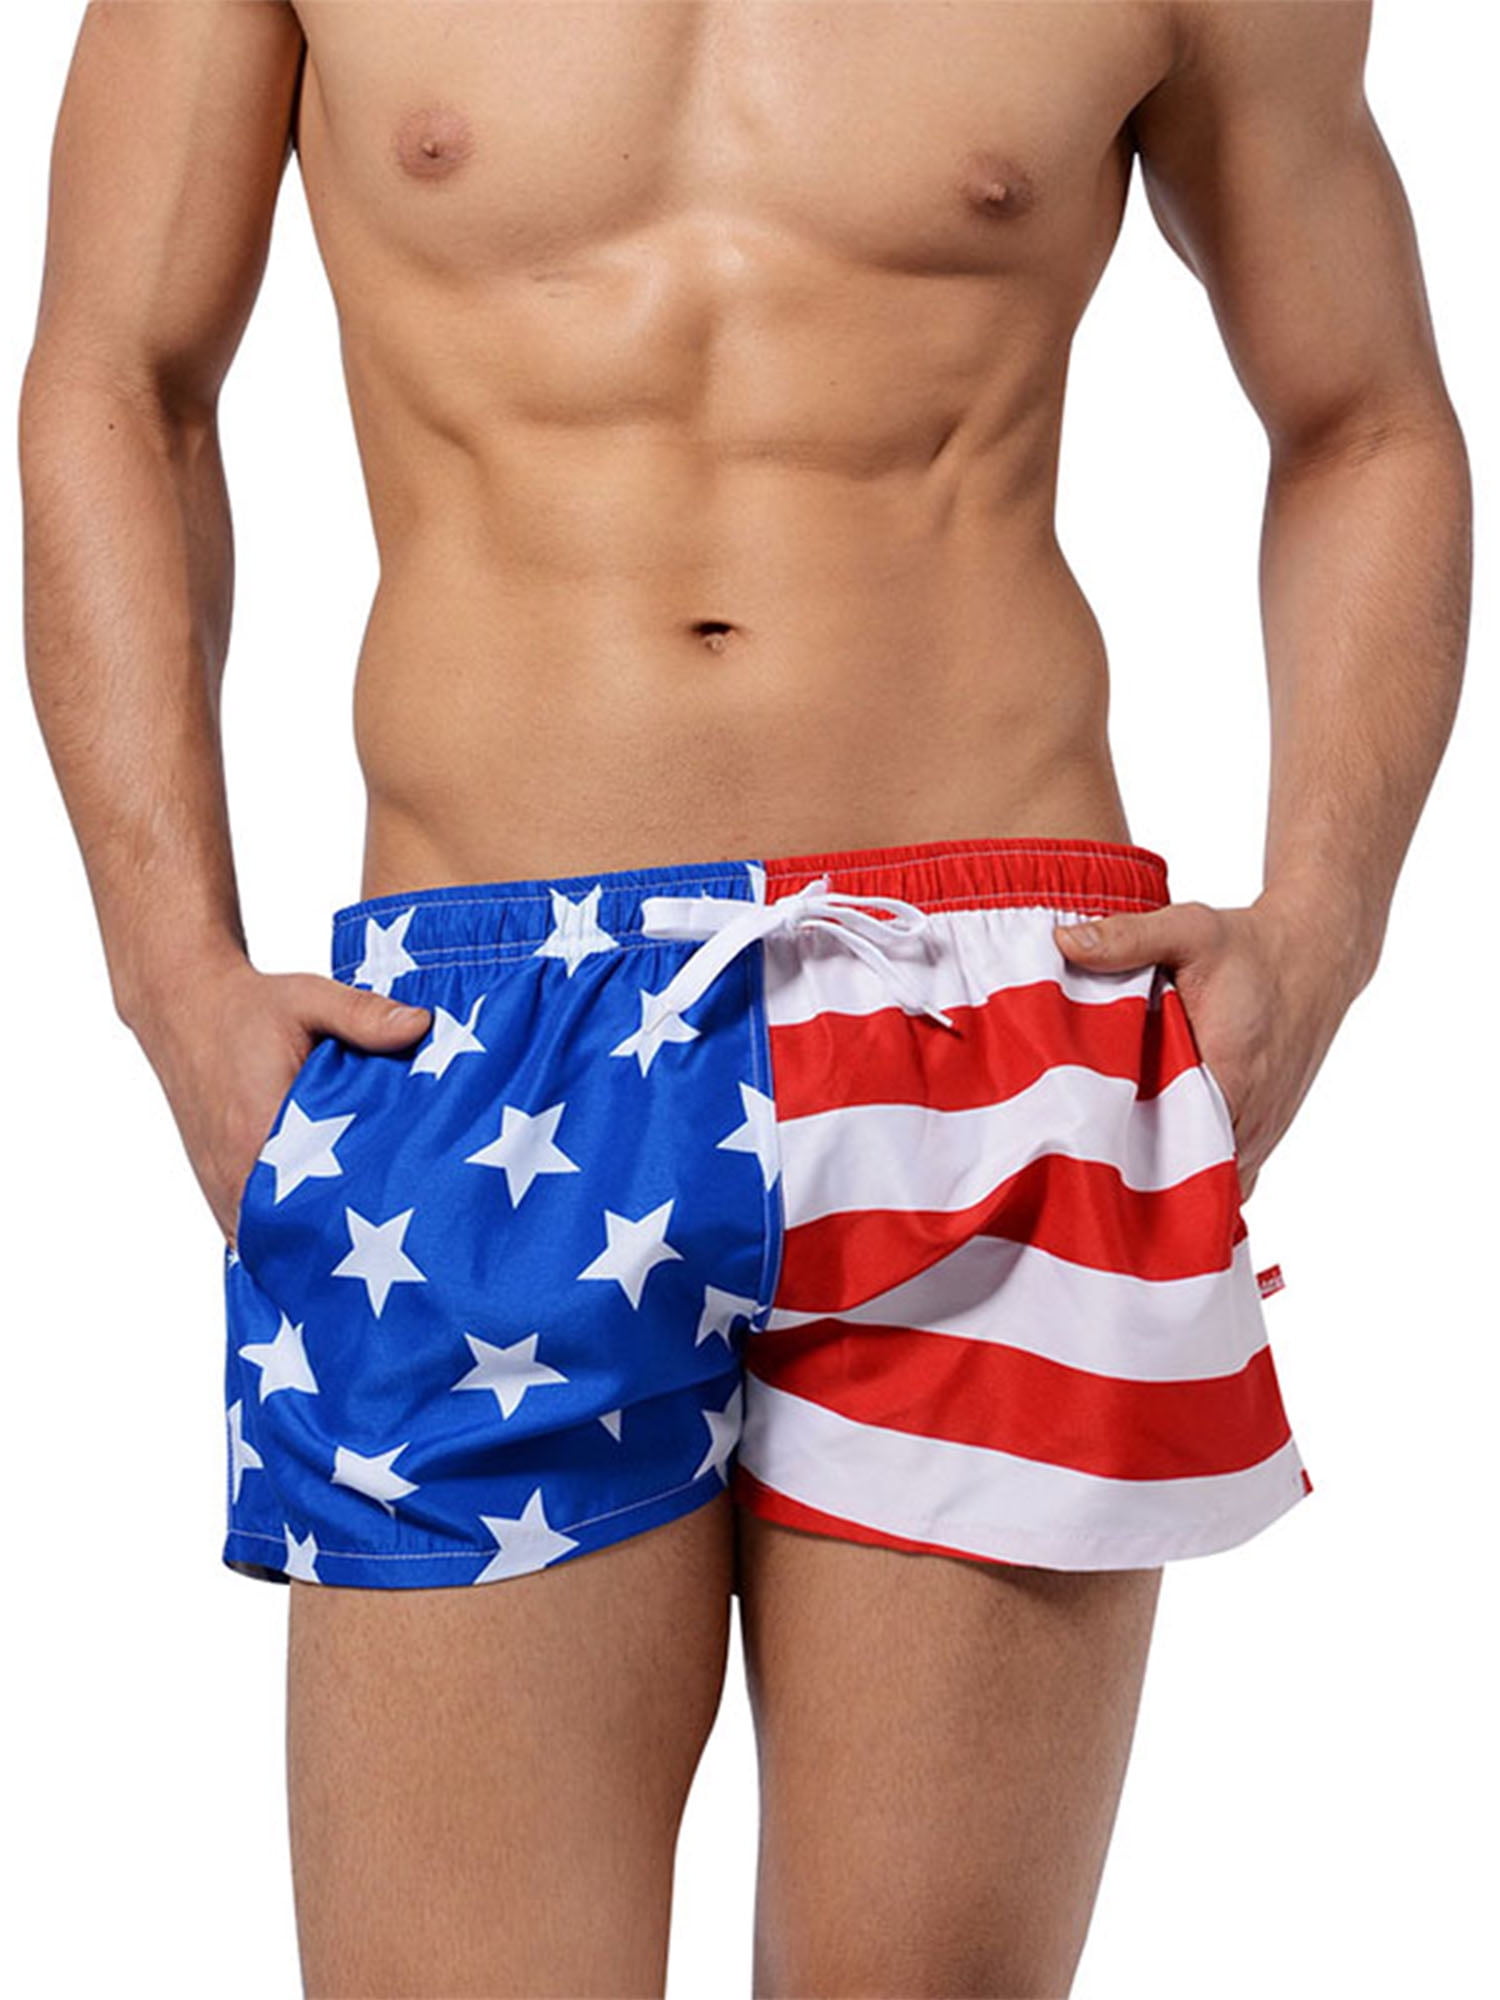 Plaid Independence Day Birthday Patriotic 4TH July Happy American Teen Swim Trunks Bathing Suit Shorts Board Beach